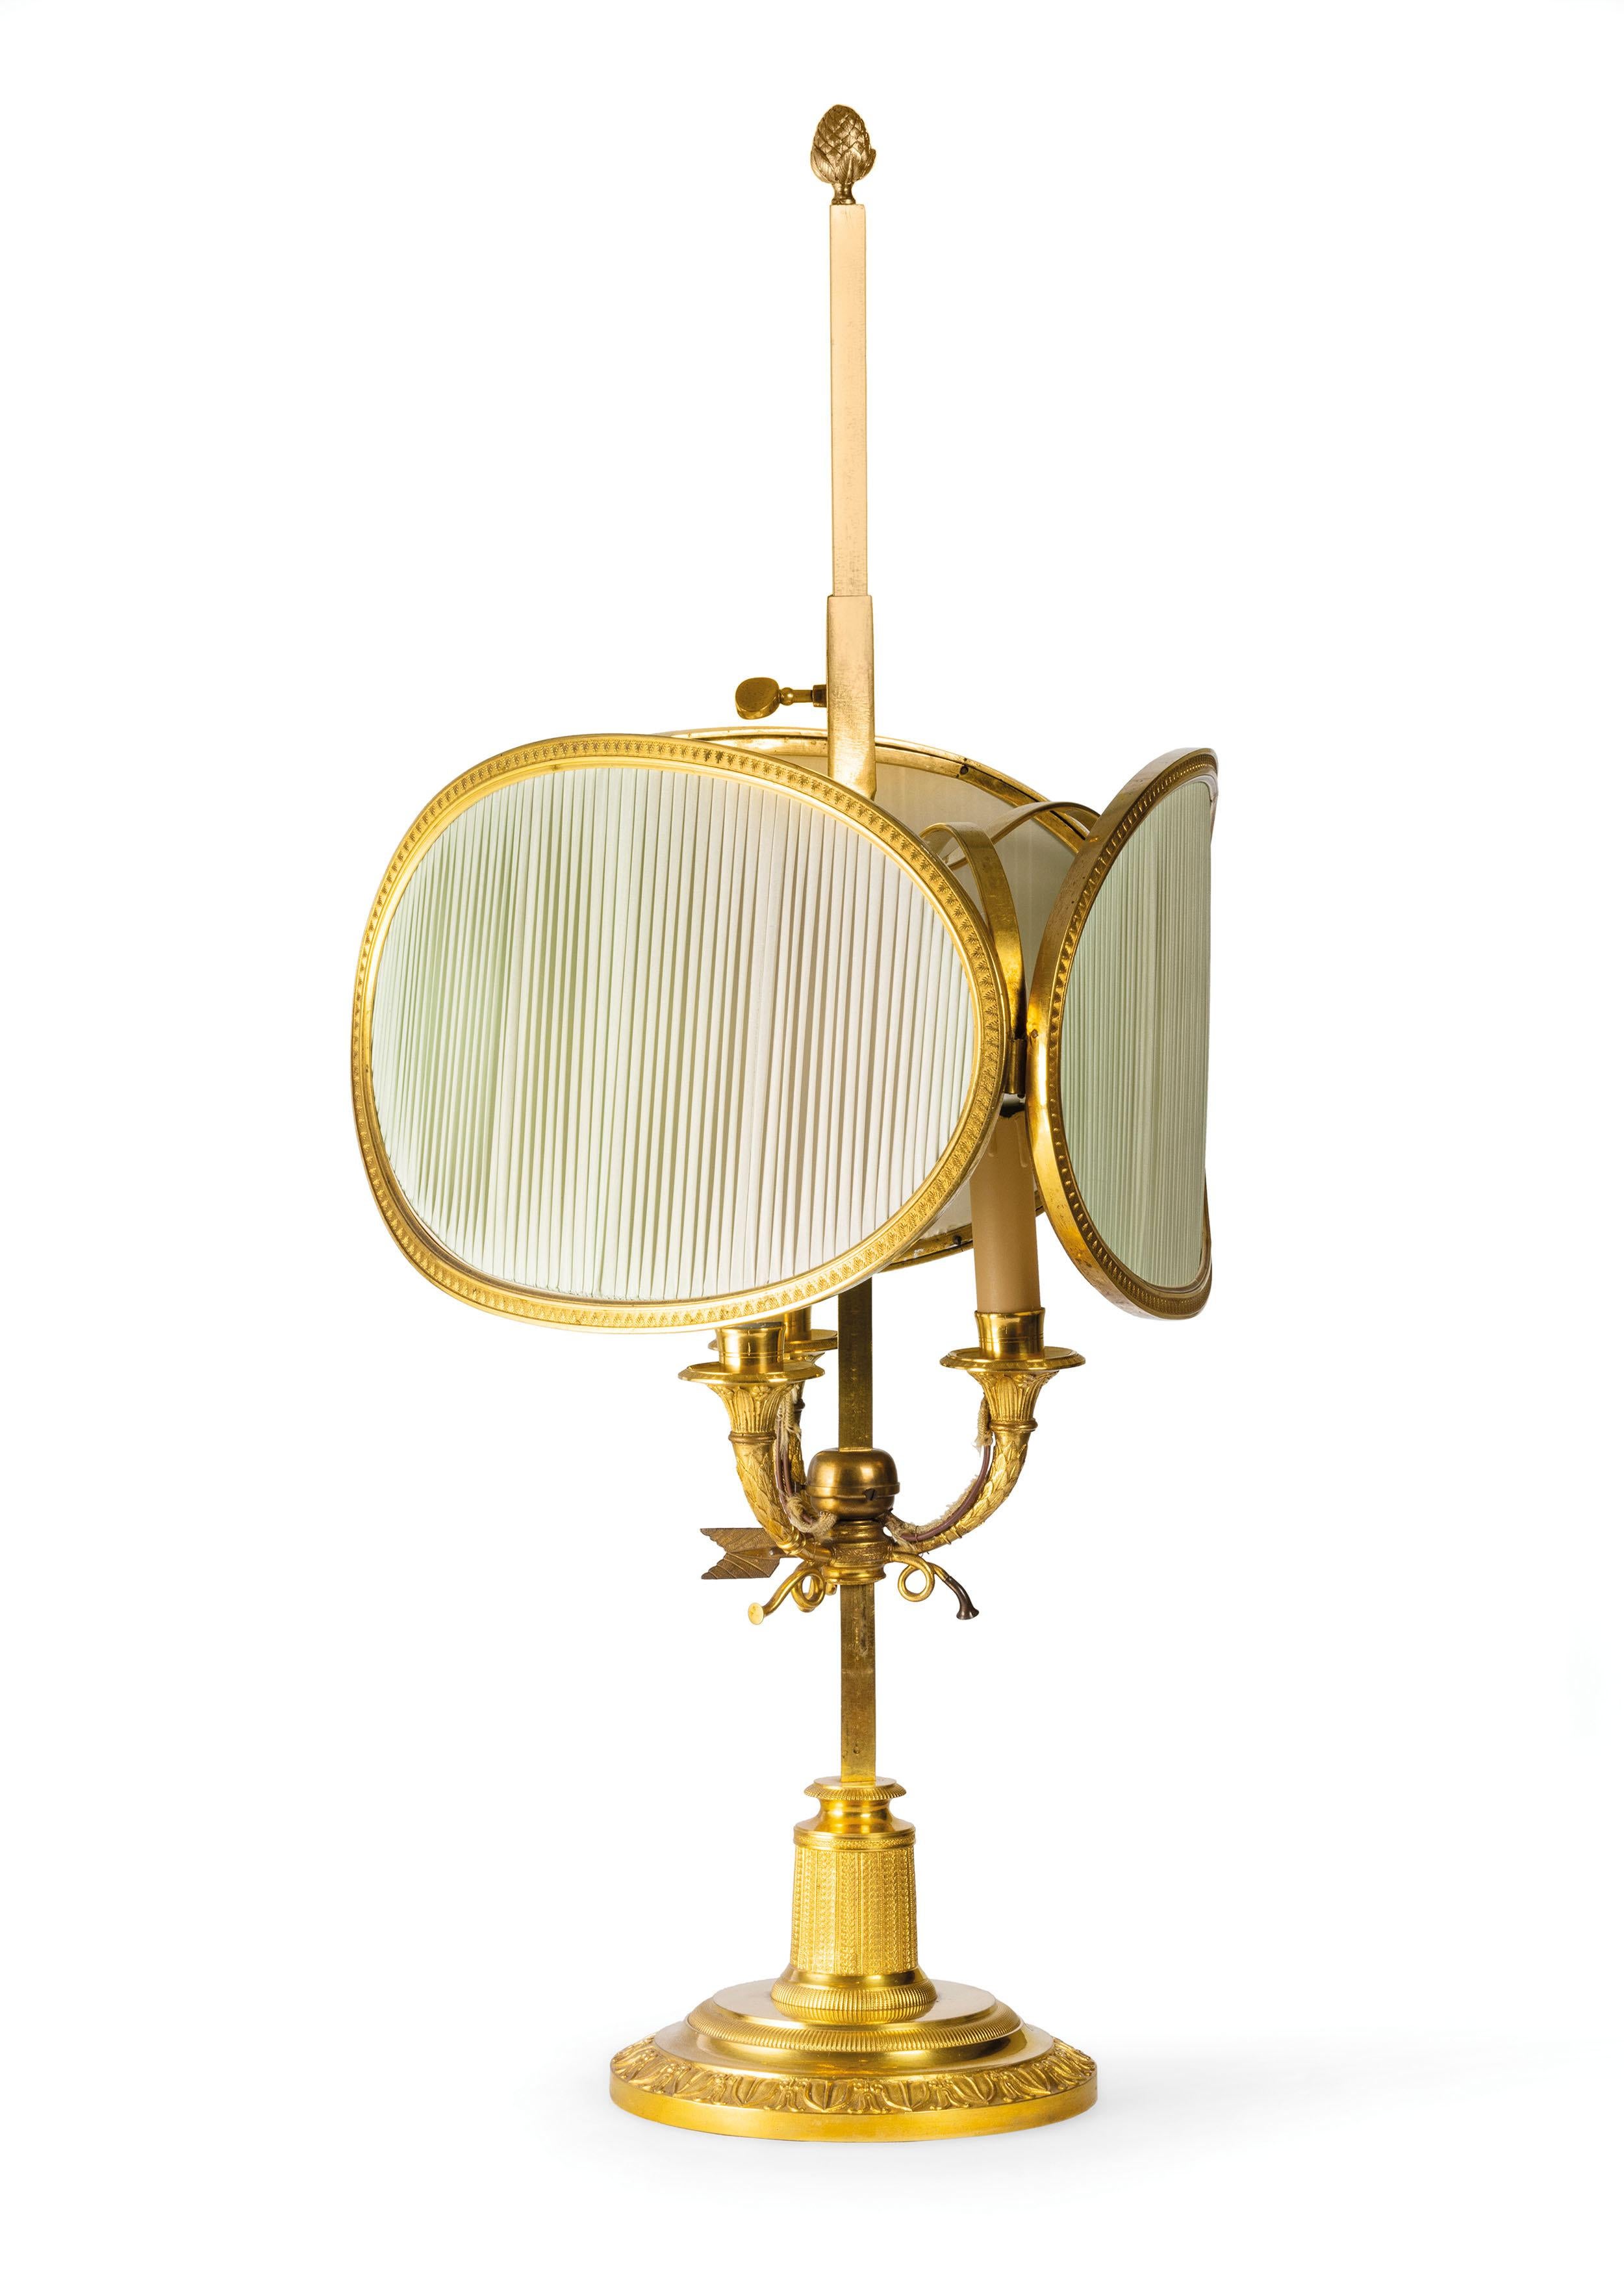 20th Century, French Gilt Bronze Buillotte Lamp 
This elegant table lamp model buillotte was made in France towards the beginning of the twentieth century, of classic taste with decorative elements inspired by the styles of Louis XVI and Empire. The